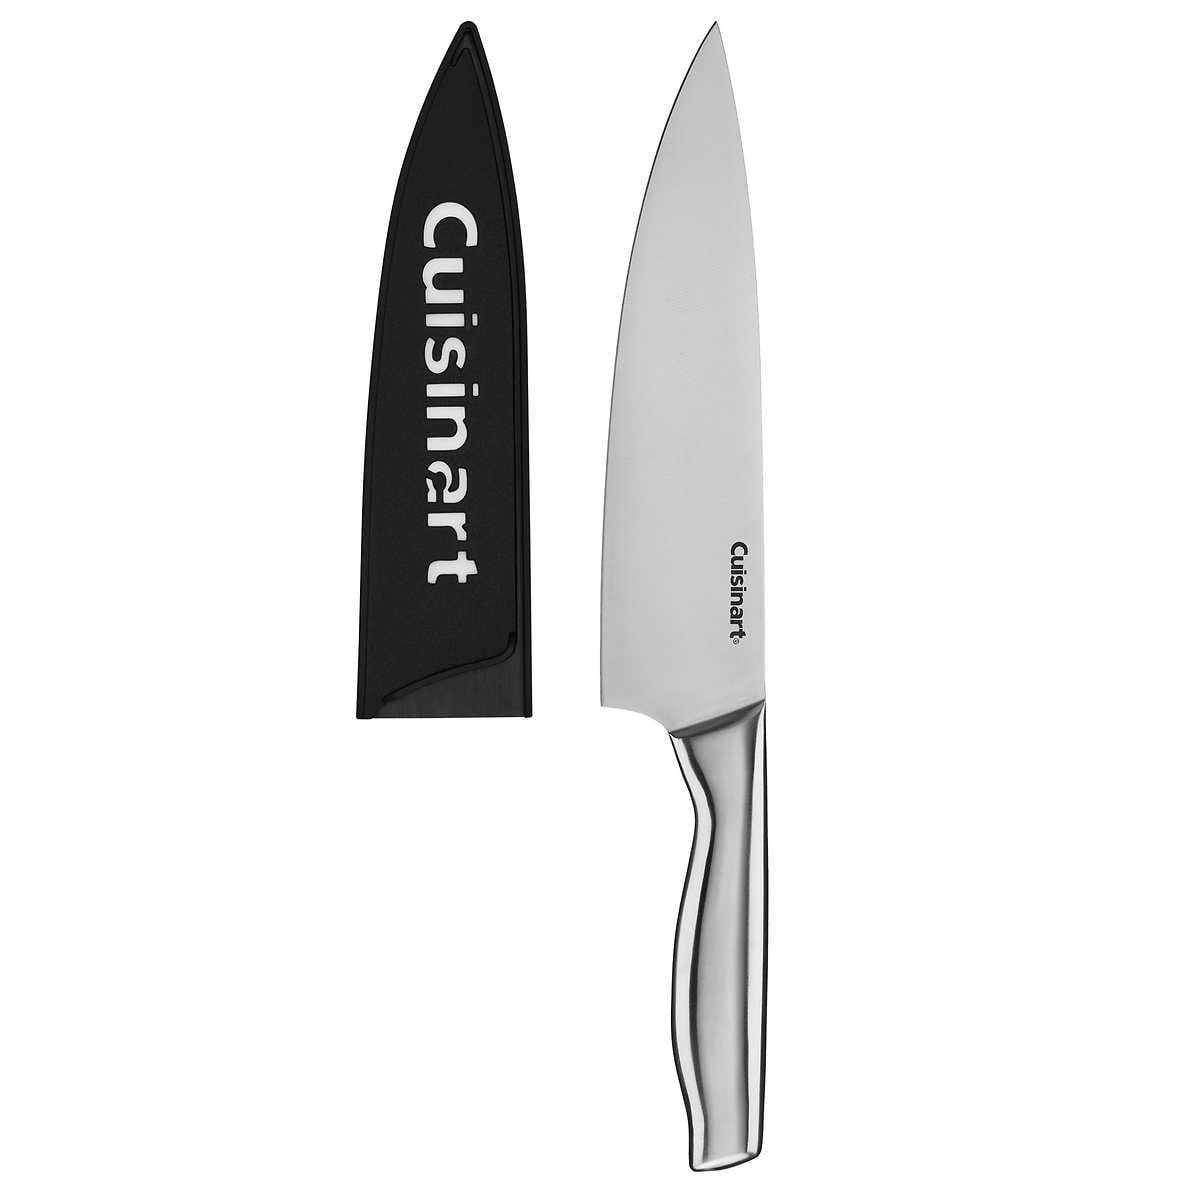 Williams Sonoma Cuisinart German Stainless Steel Hollow Handle